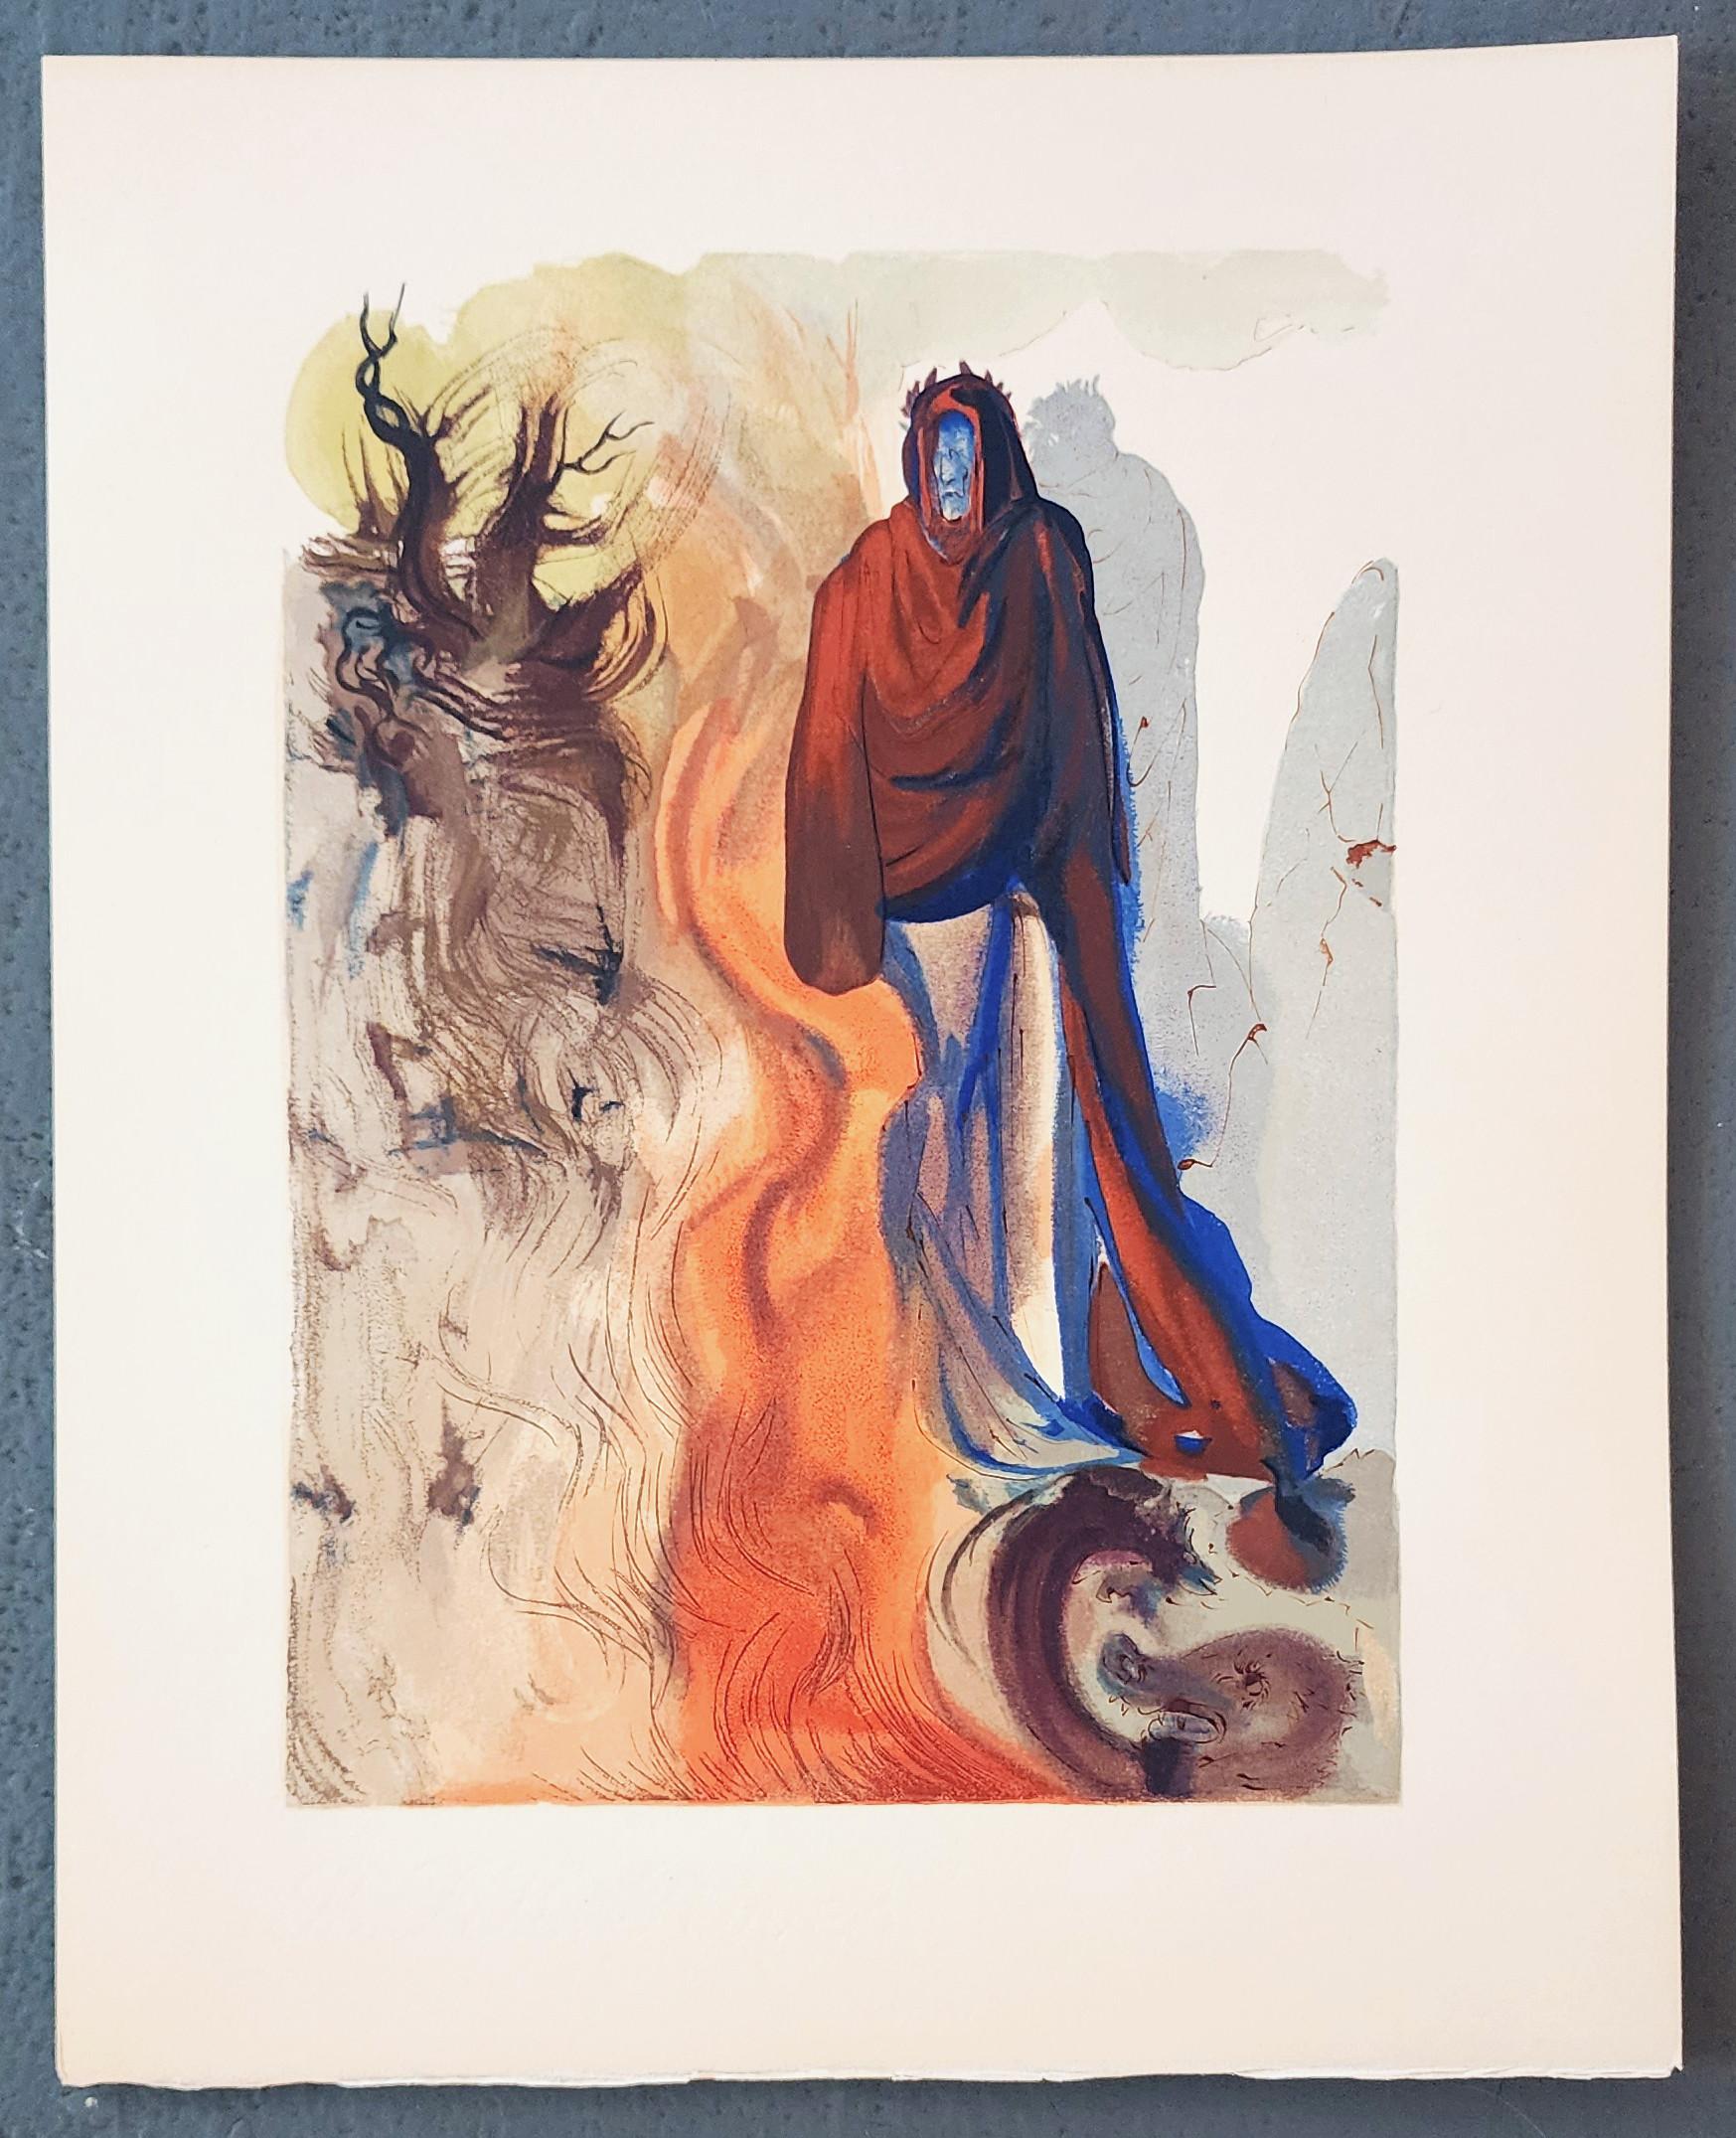 Apparition de Dite (40% OFF + FREE U.S. / $20 INTERN. SHIPPING - LIMITED TIME) - Print by Salvador Dalí